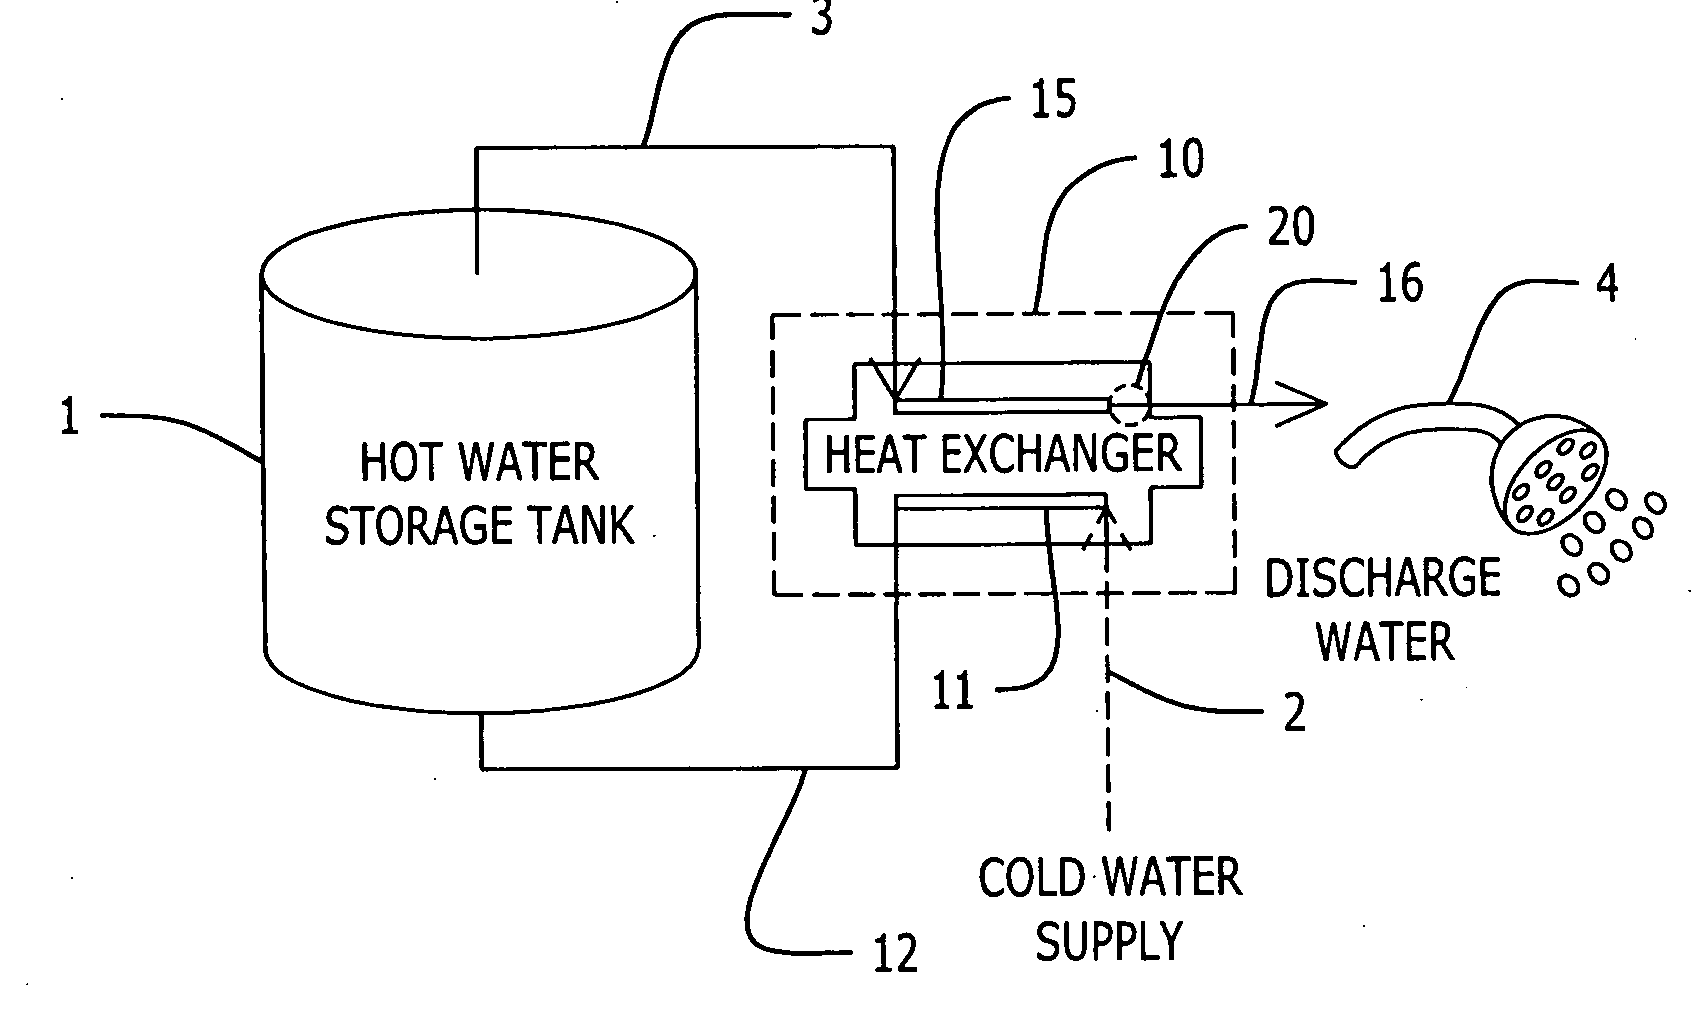 Hot water supply device